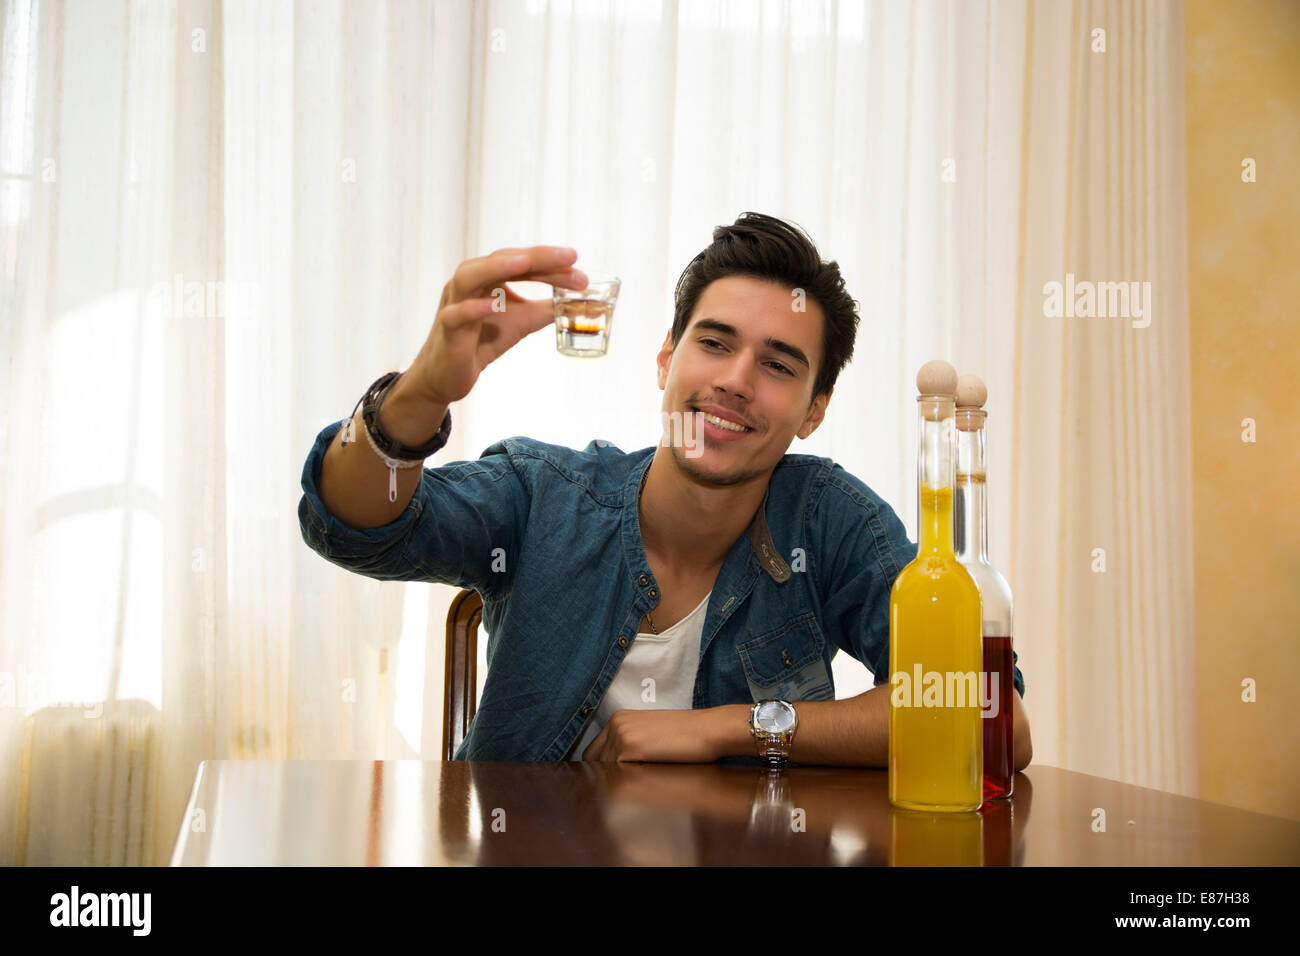 Young man sitting drinking alone at a table, making a toast, with two bottles of liquor alongside him sipping from shot glass Stock Photo